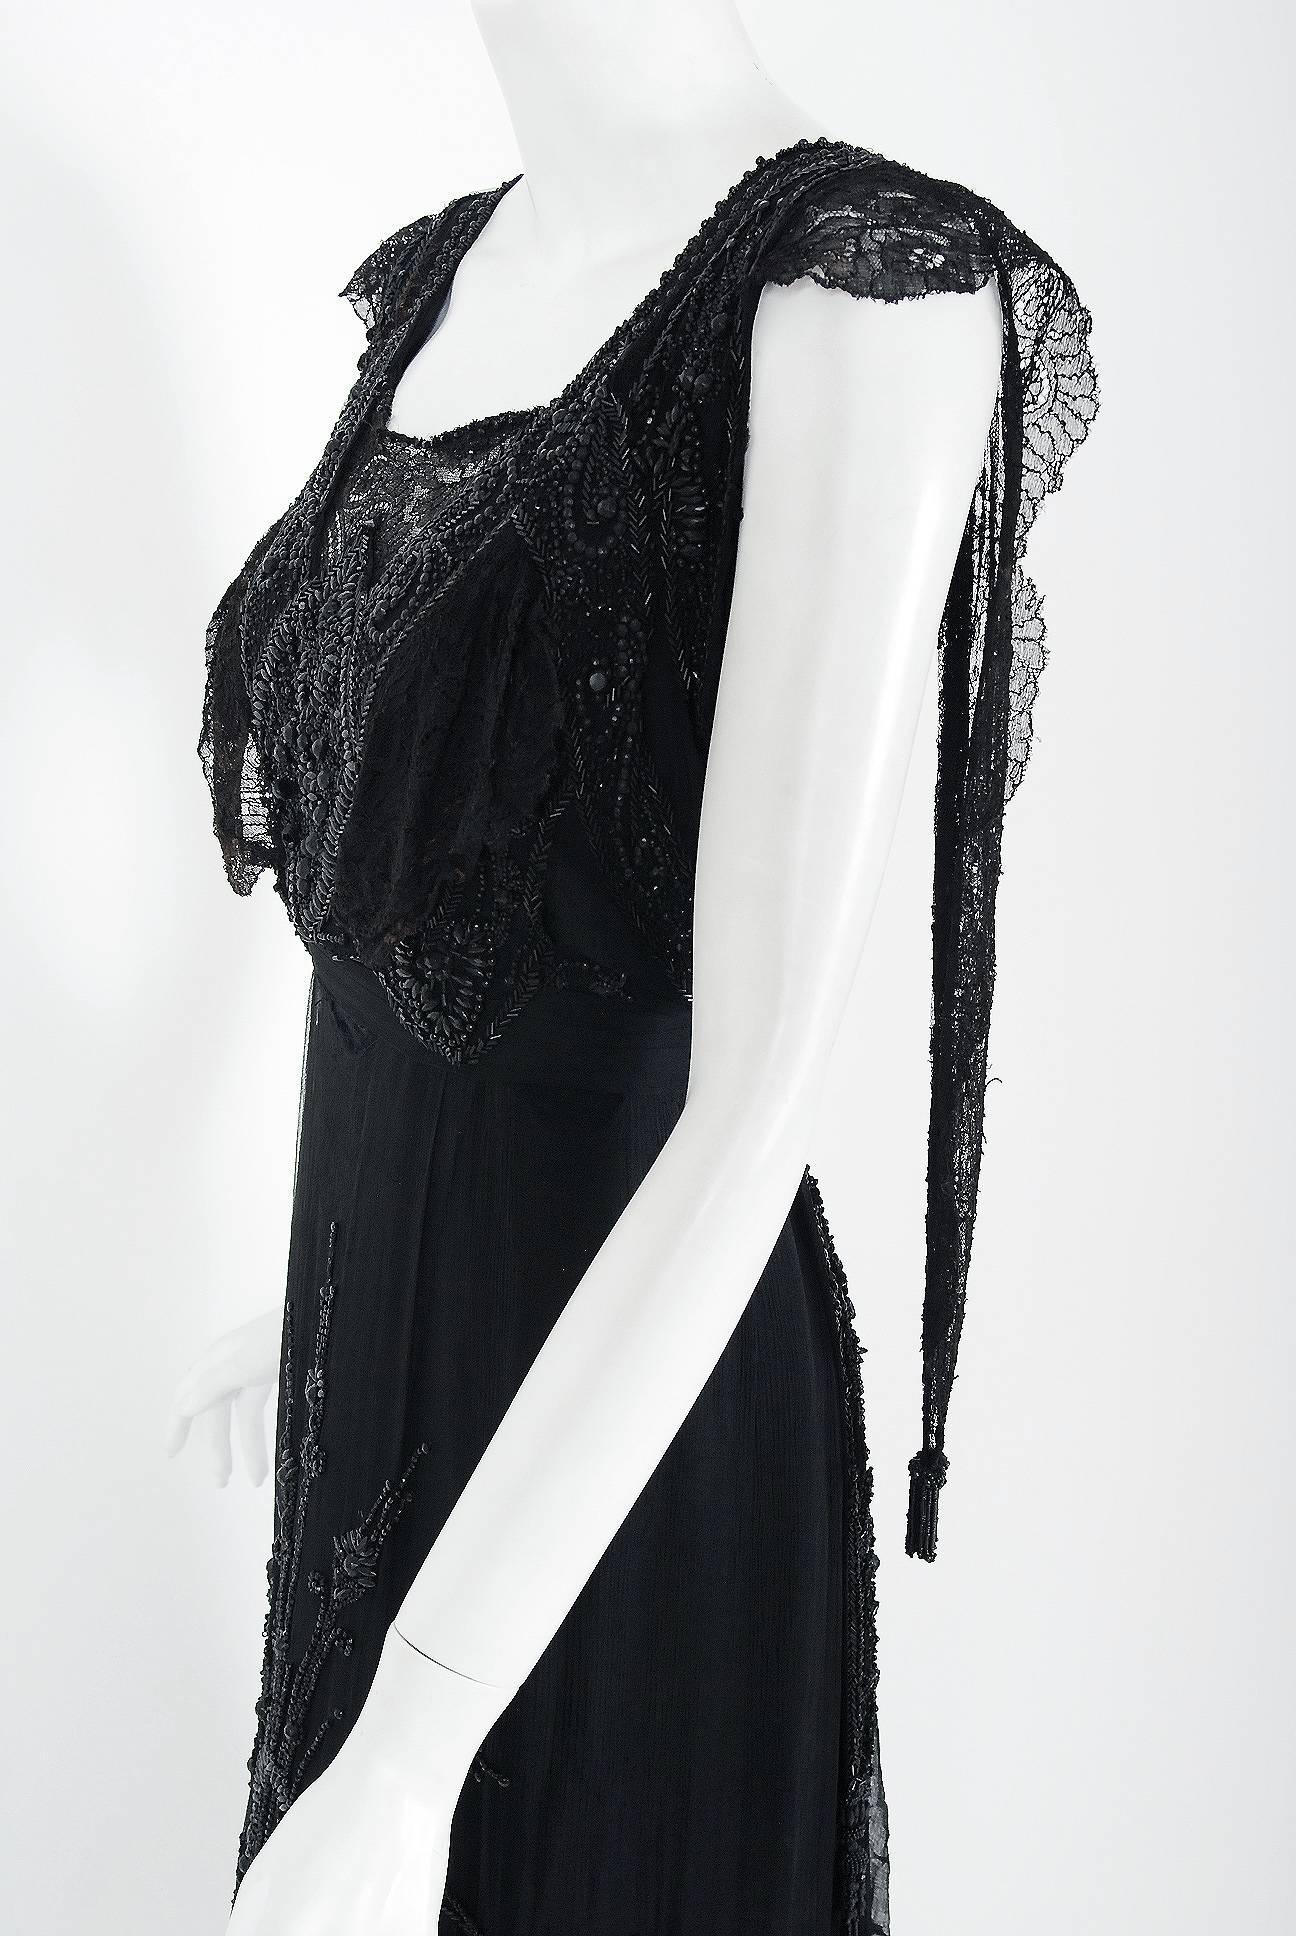 Undiminished by time, this antique evening gown still casts its seductive spell. An exceptional Edwardian tea-dress made of French chantilly-lace and silk lwith sheer black mesh net overlay, faceted beading and tassel applique. The breathtaking